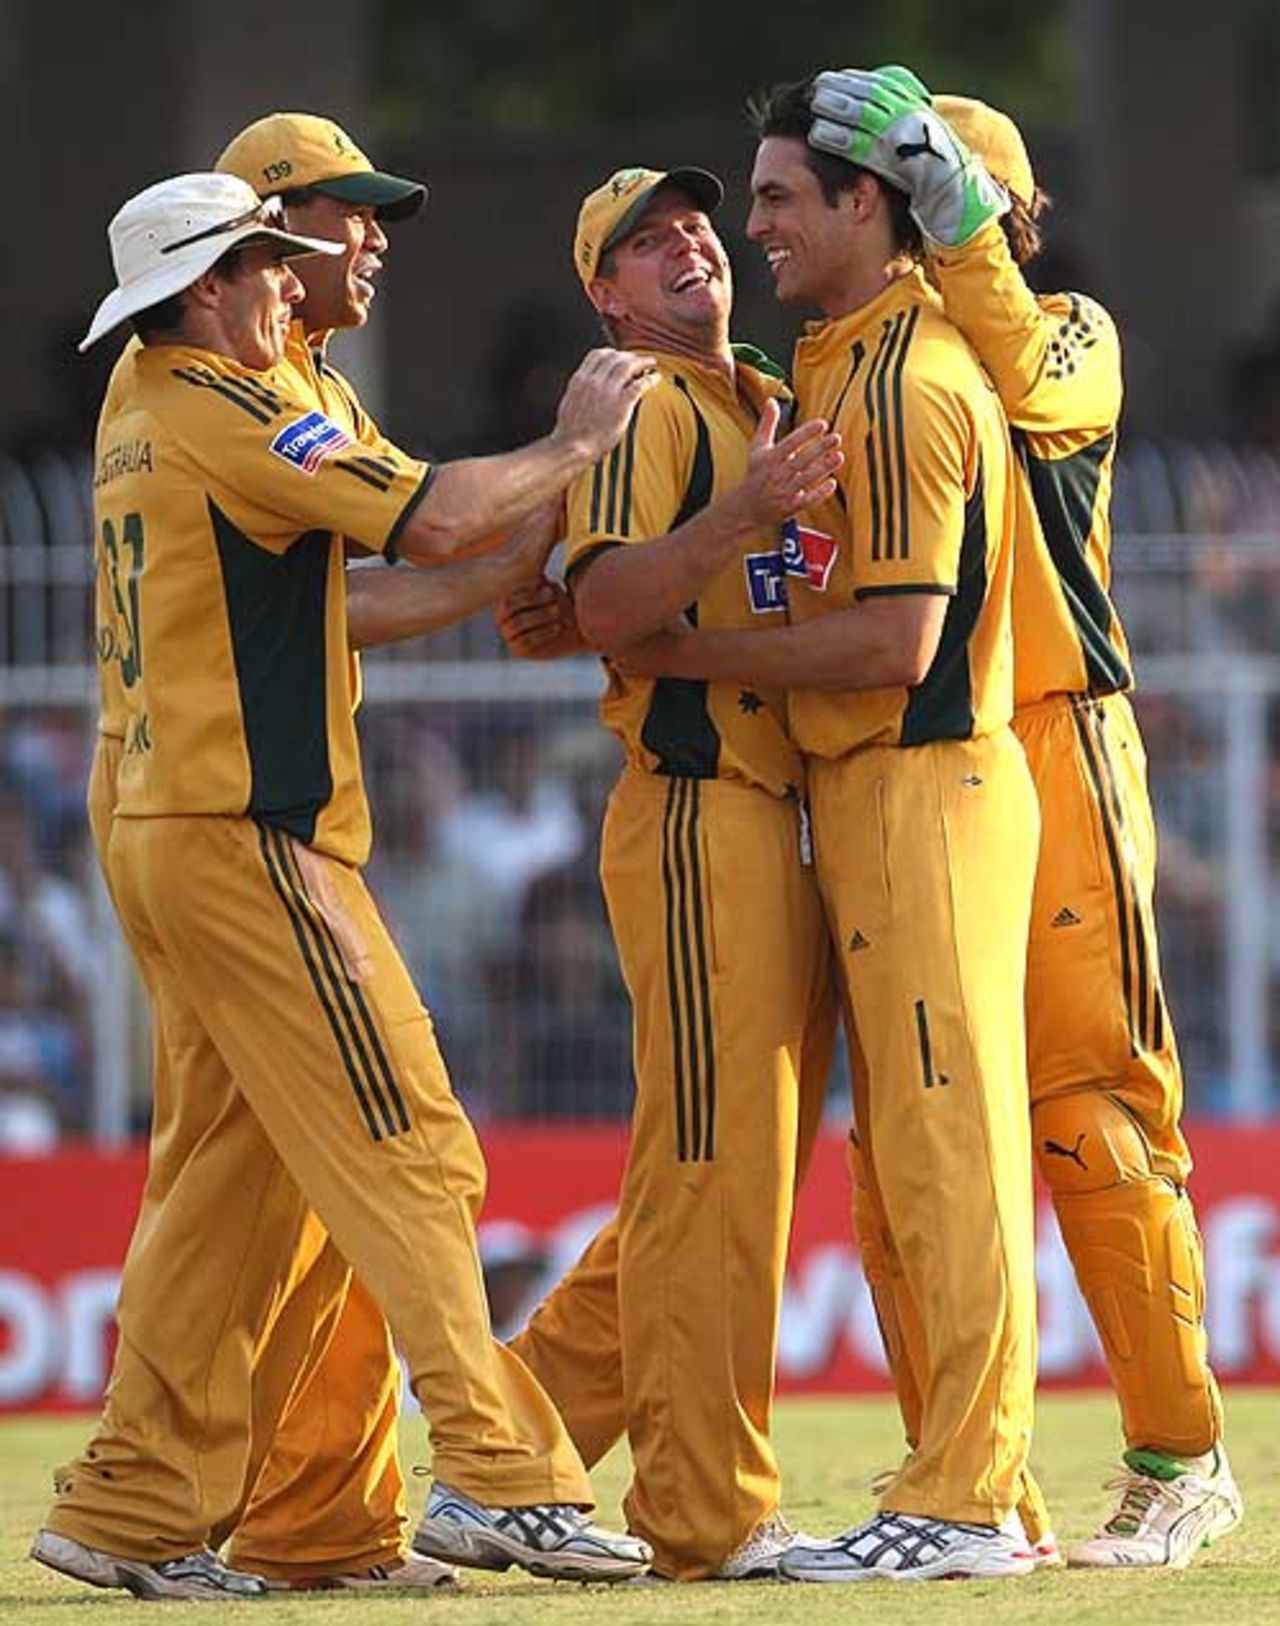 Mitchell Johnson took two wickets in the 49th over, India v Australia, 6th ODI, Nagpur, October 14, 2007   



